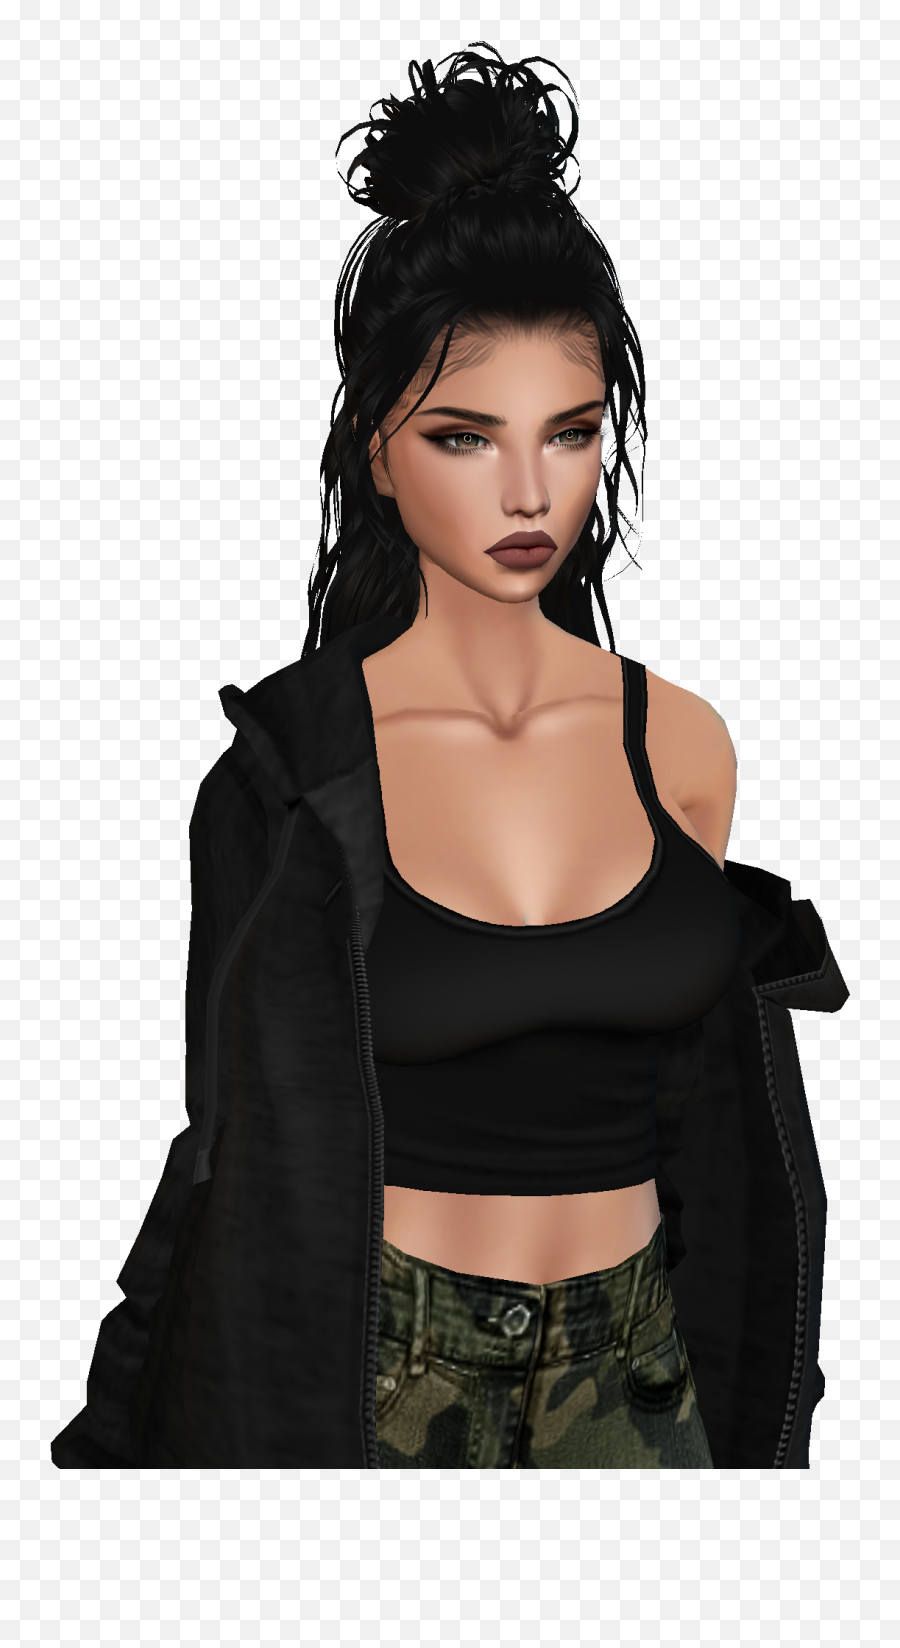 Download Imvu Images For Free - 2017 Imvu Looks Png,Imvu Icon Download